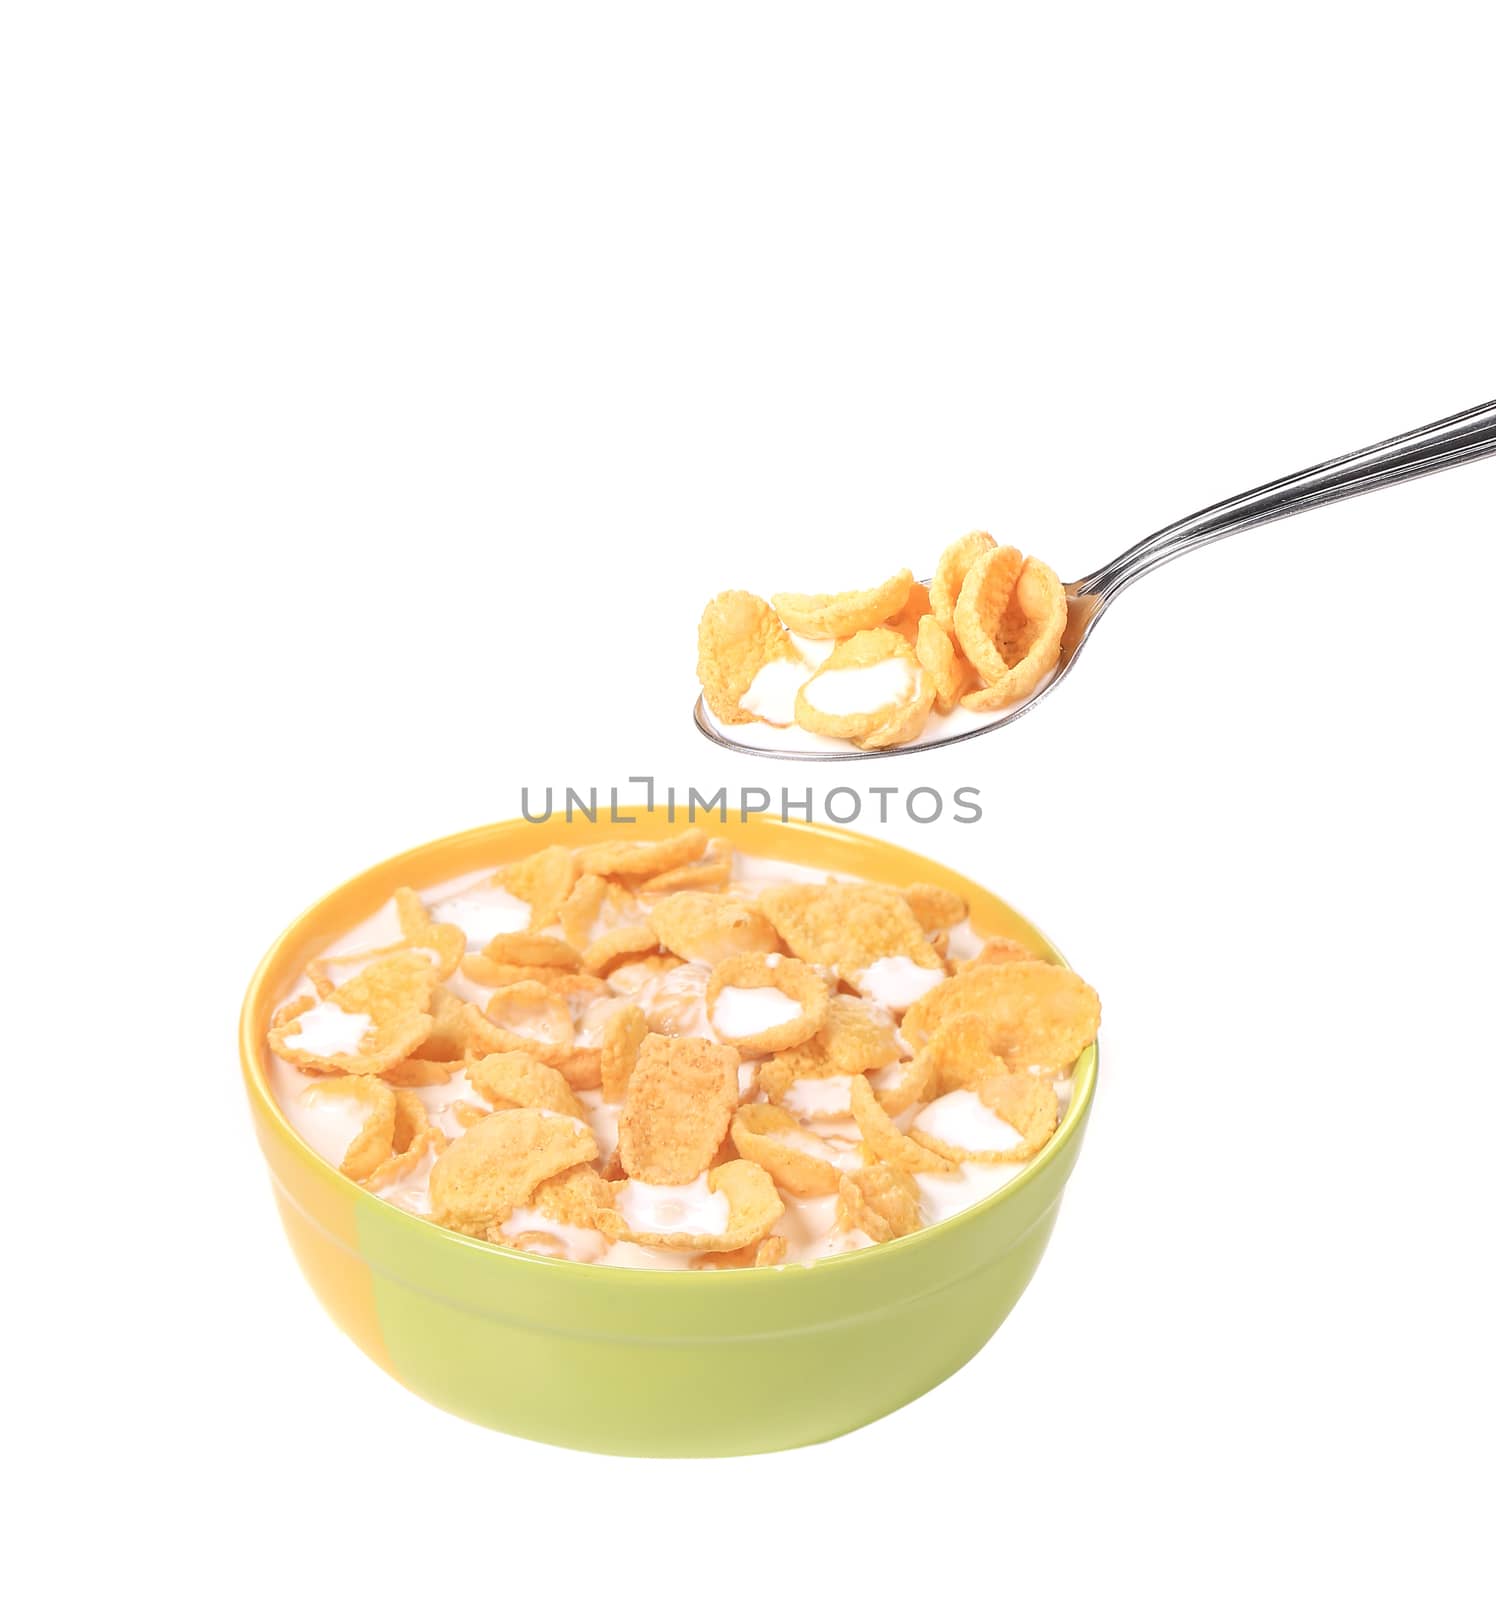 Cereal with milk. Isolated on a white background.